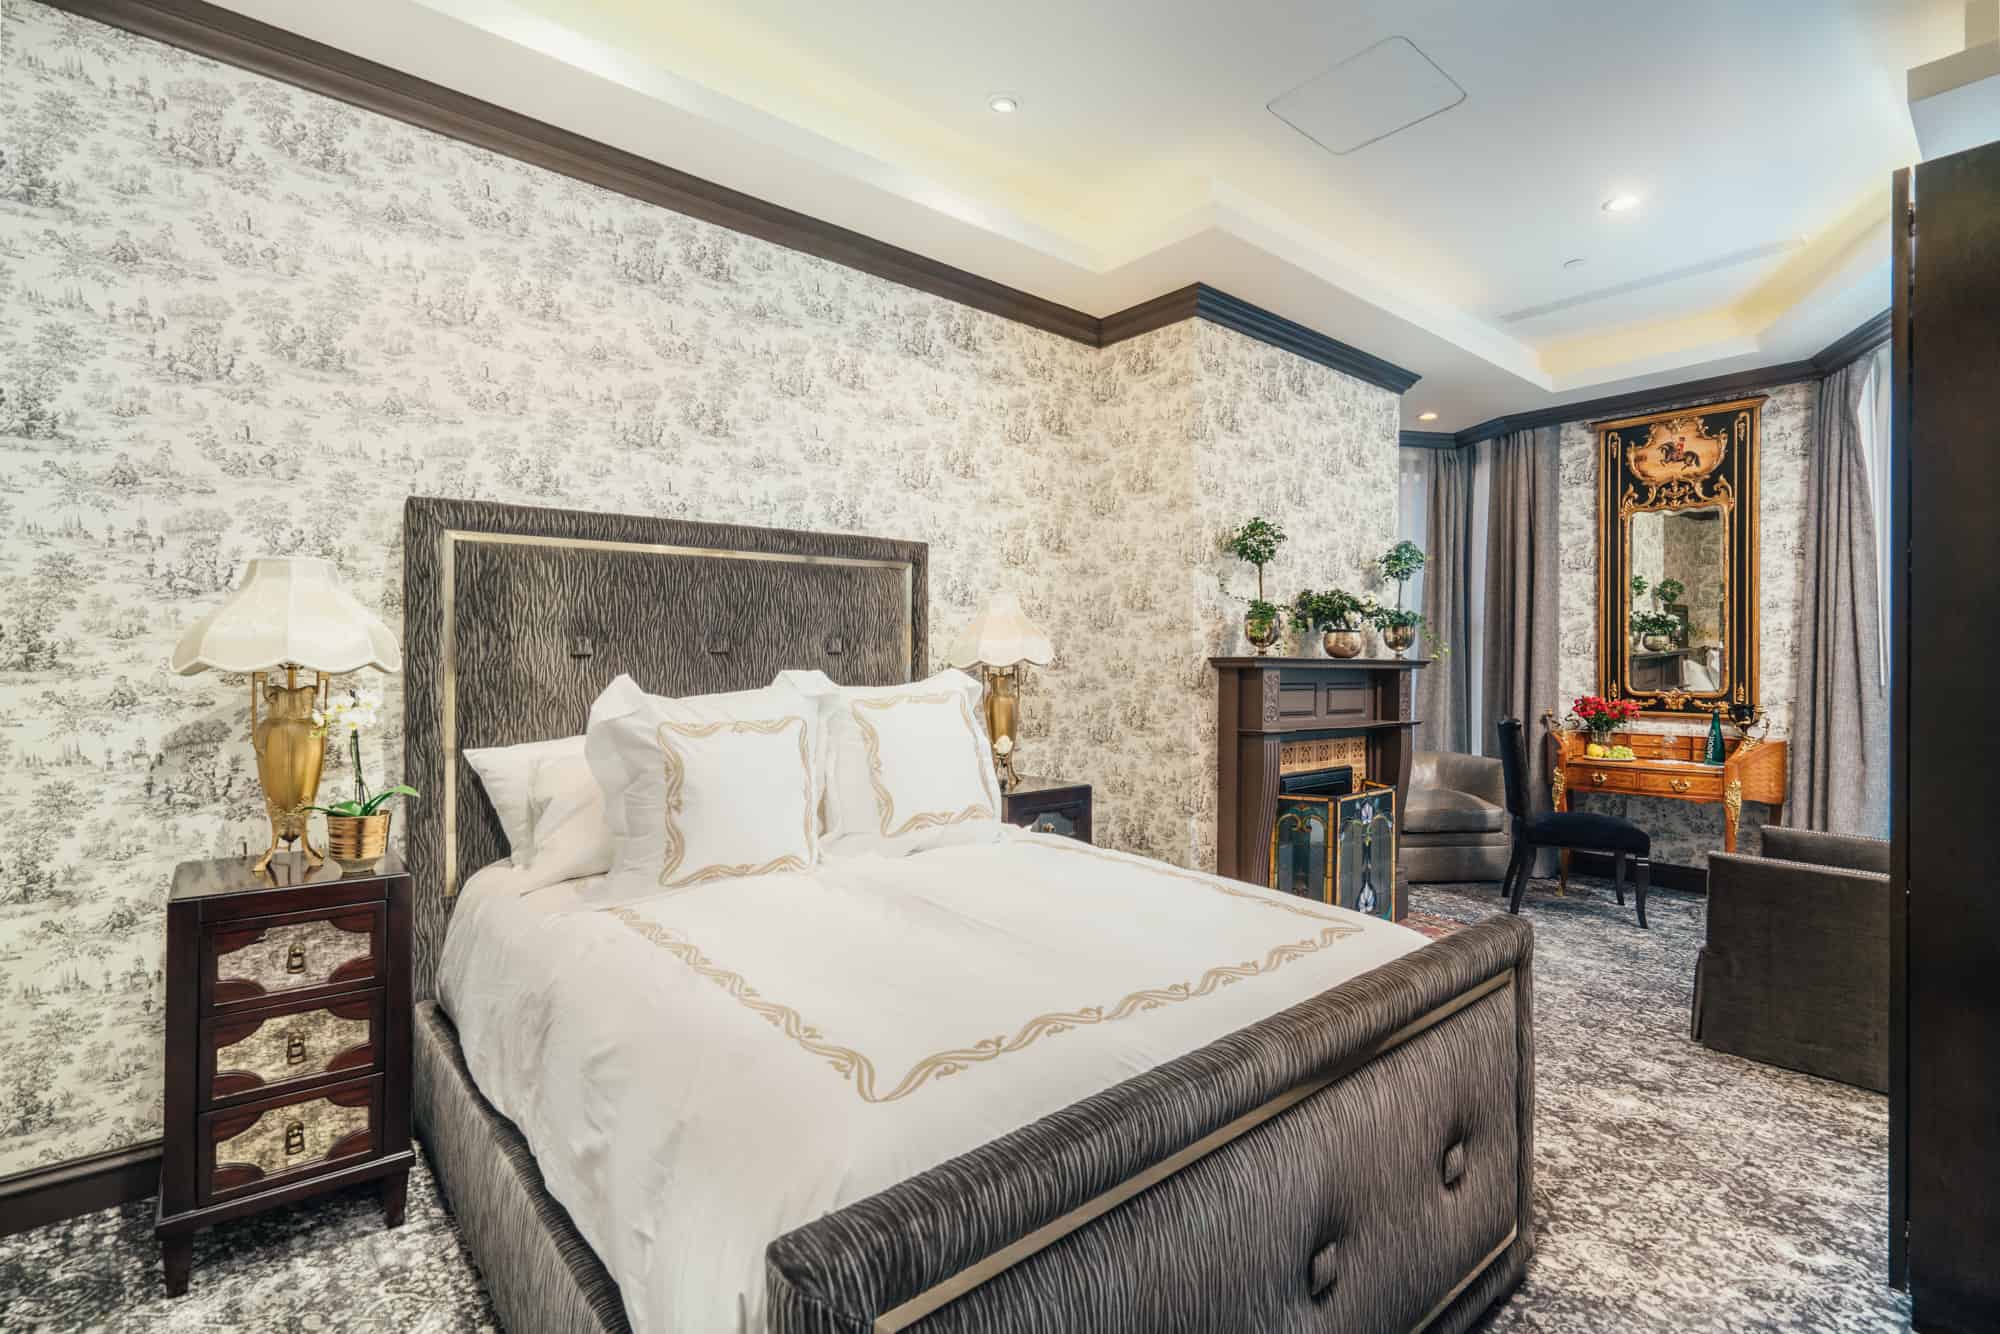 The Jardin Room - Queen size bed, Nero Portoro marble bathroom with separate shower and deep soaking tub.